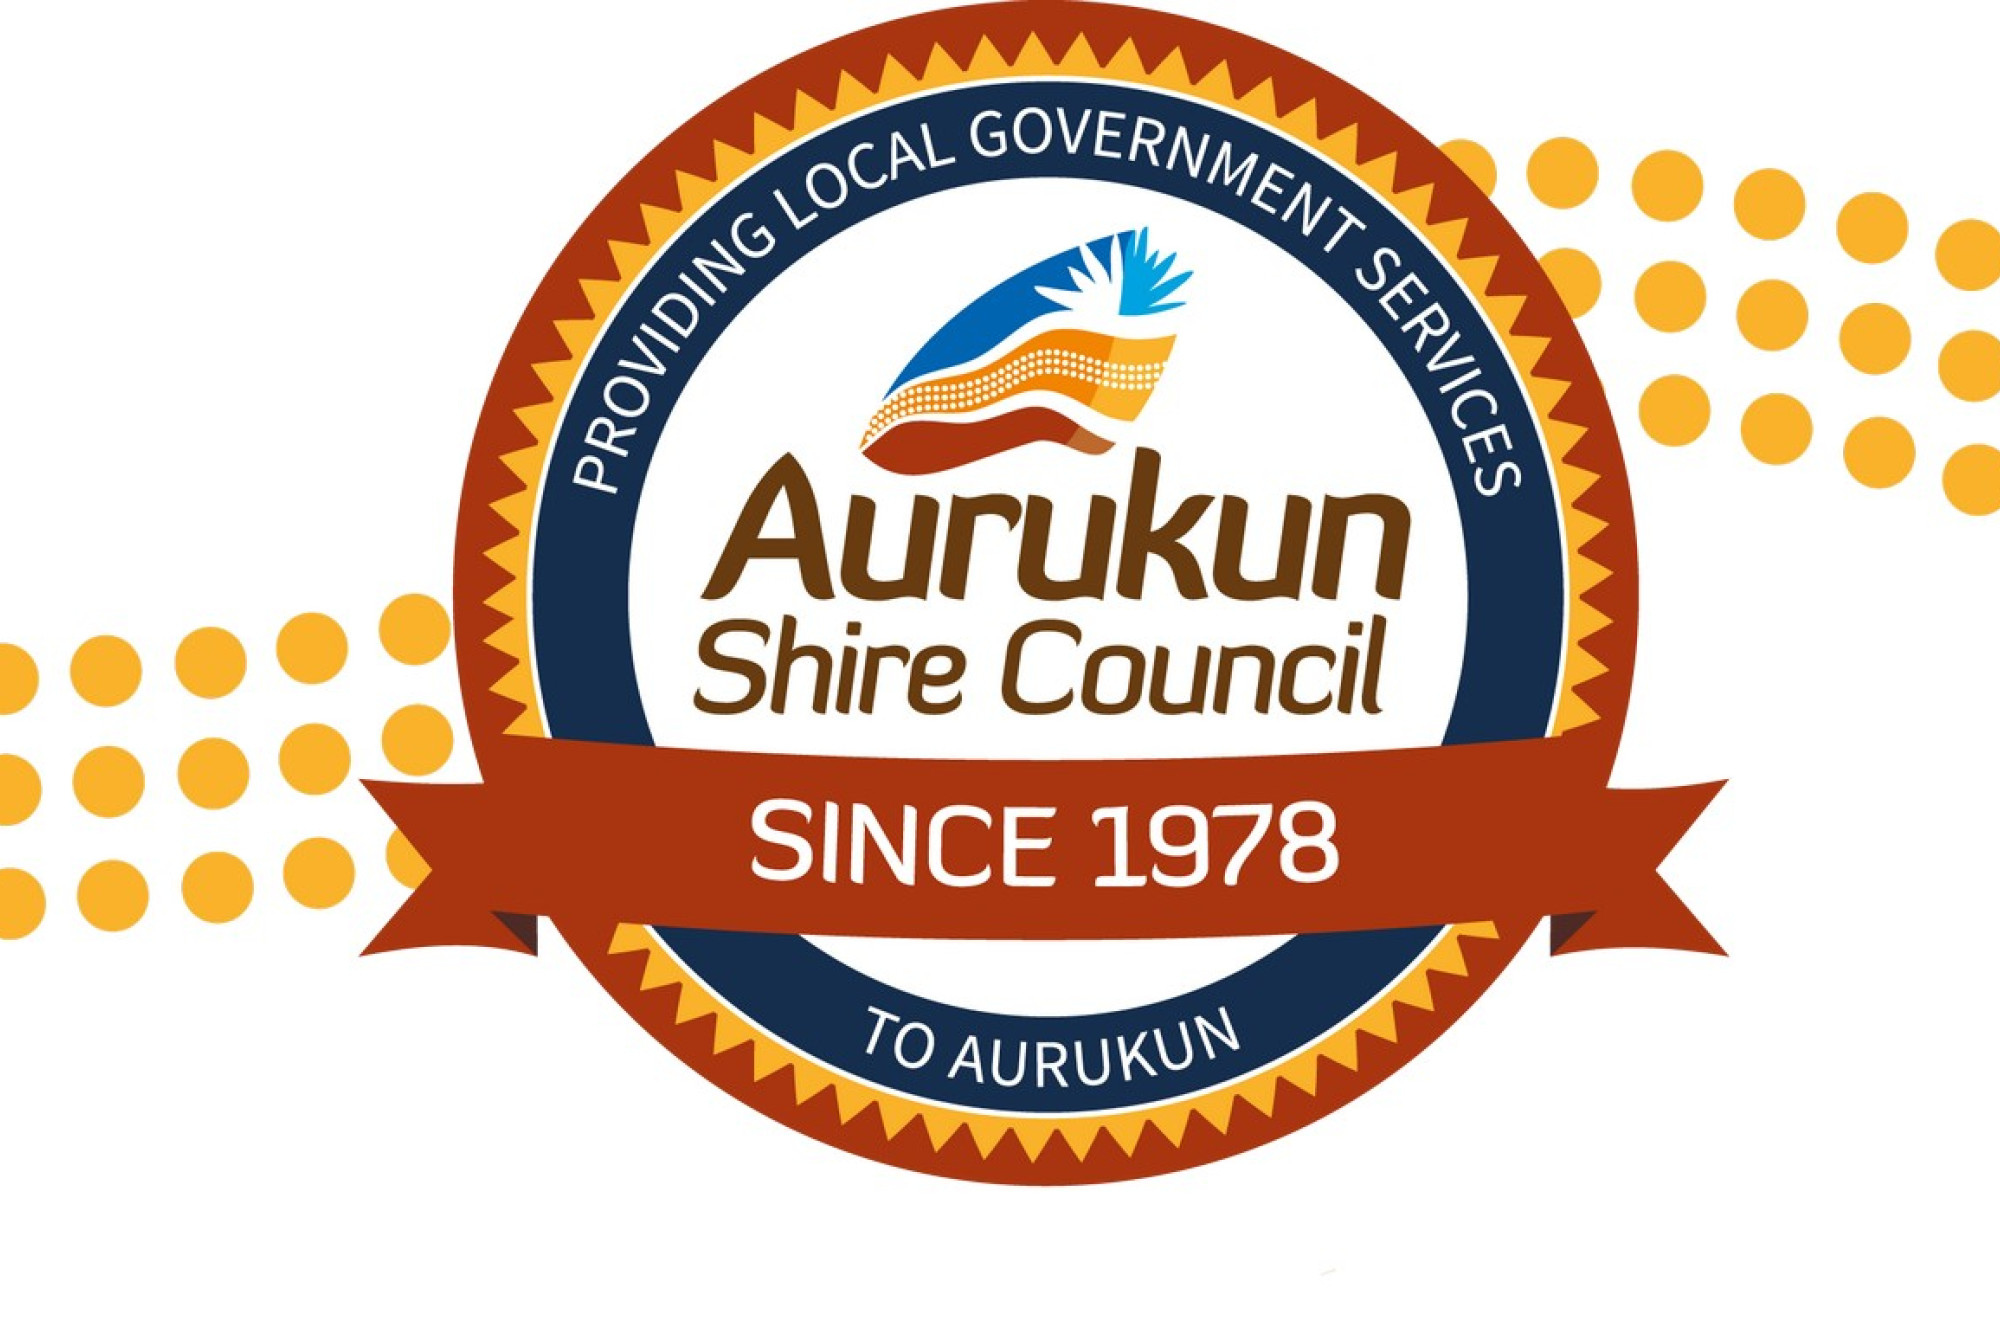 Travel Restrictions imposed at Aurukun. - feature photo